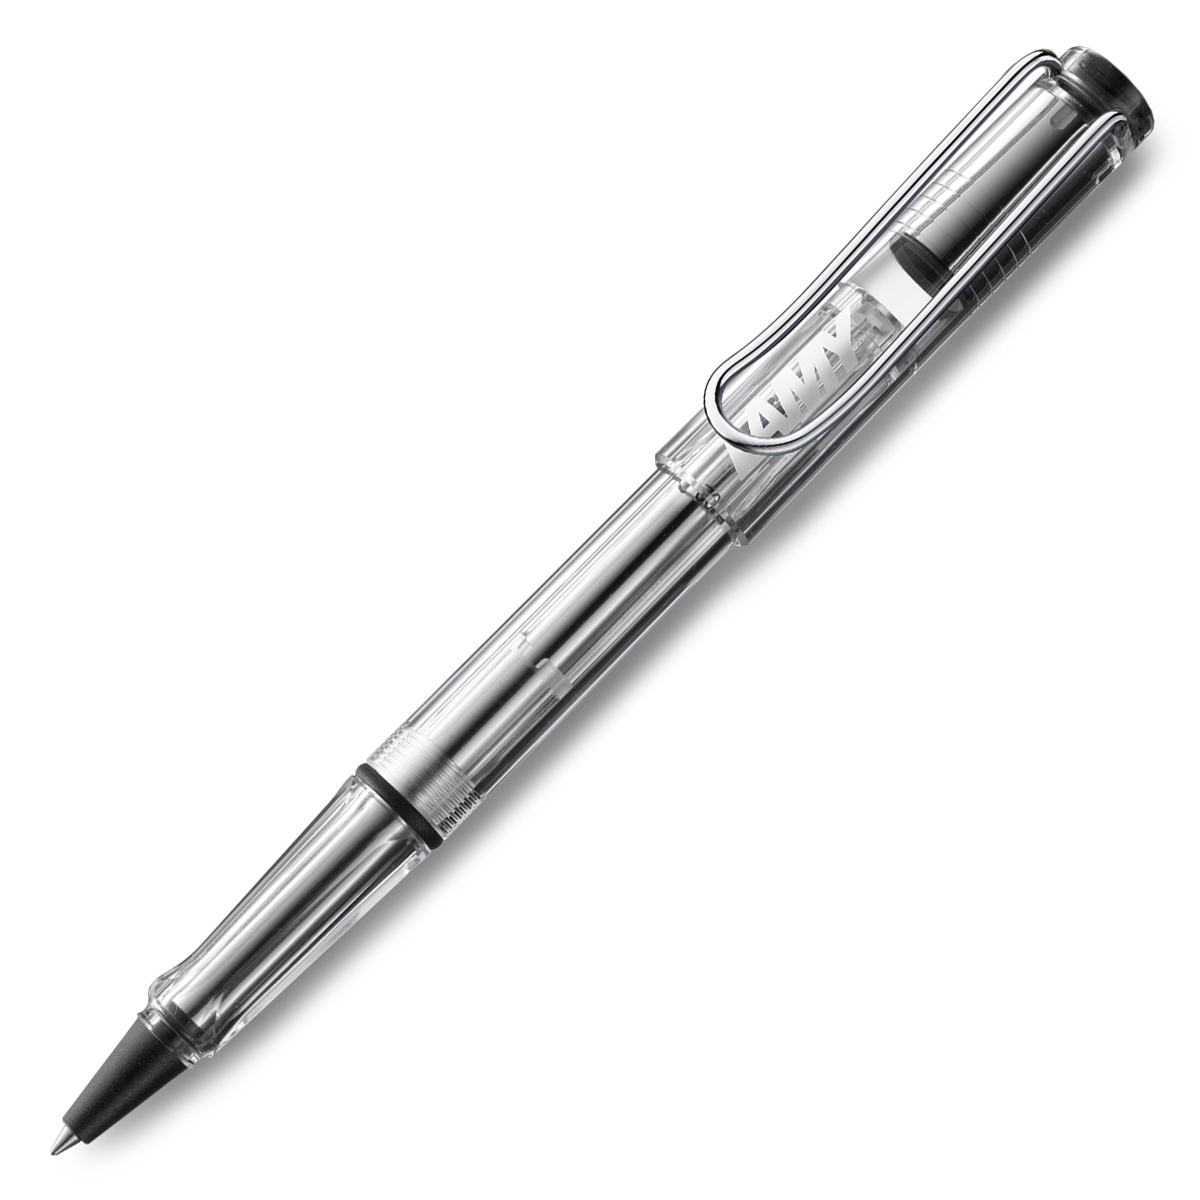 Vista Rollerball in the group Pens / Fine Writing / Rollerball Pens at Pen Store (101971)